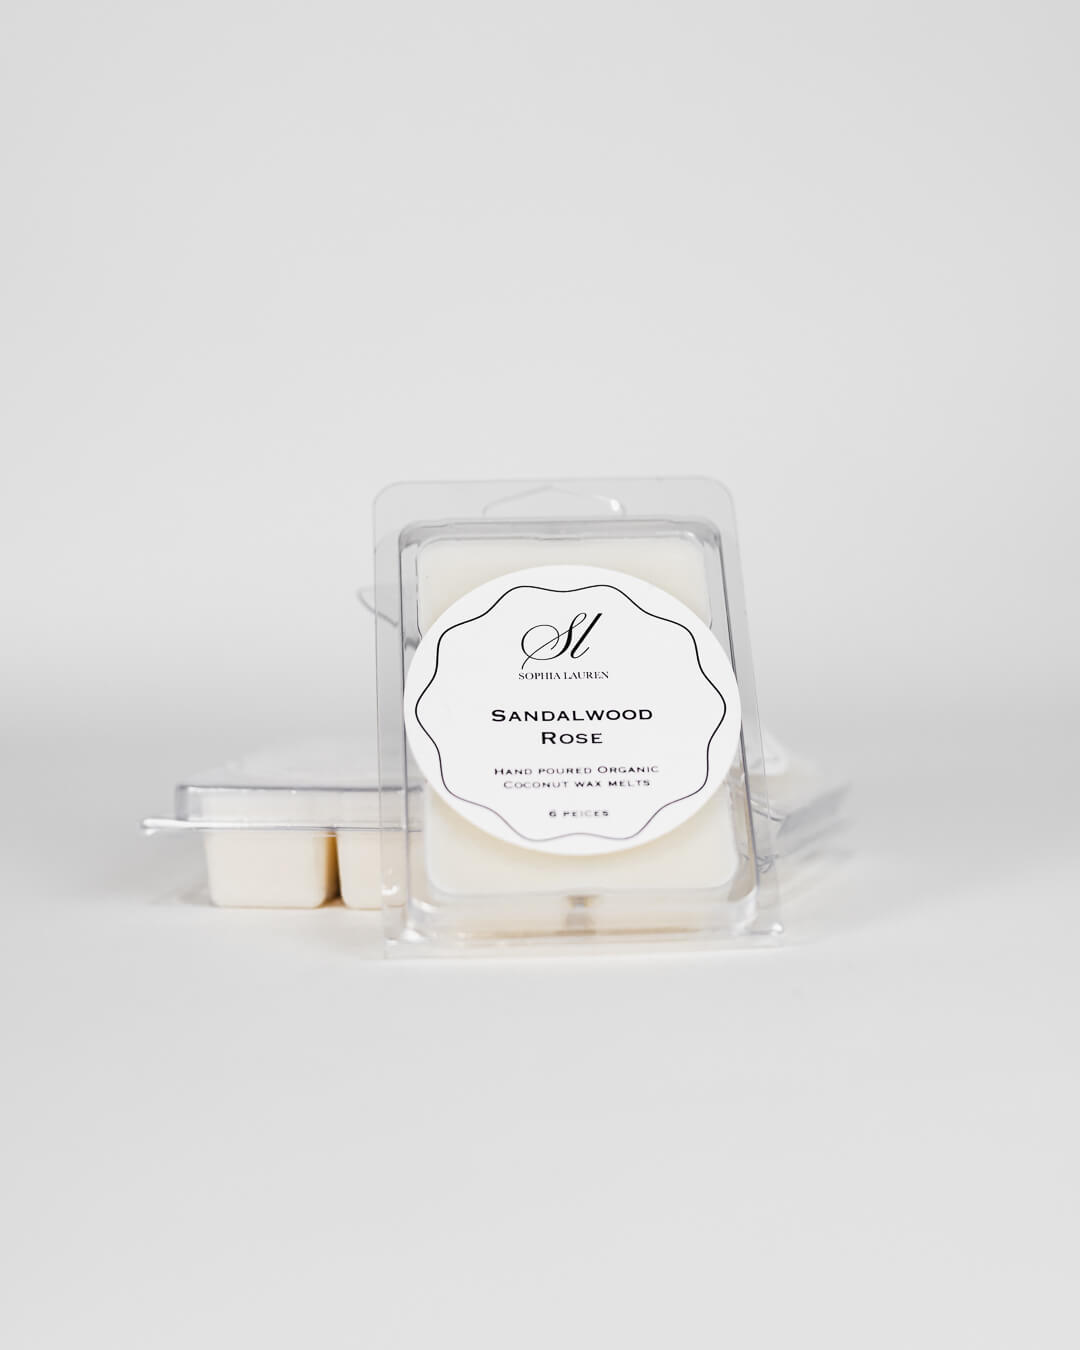 coconut wax melt, scented